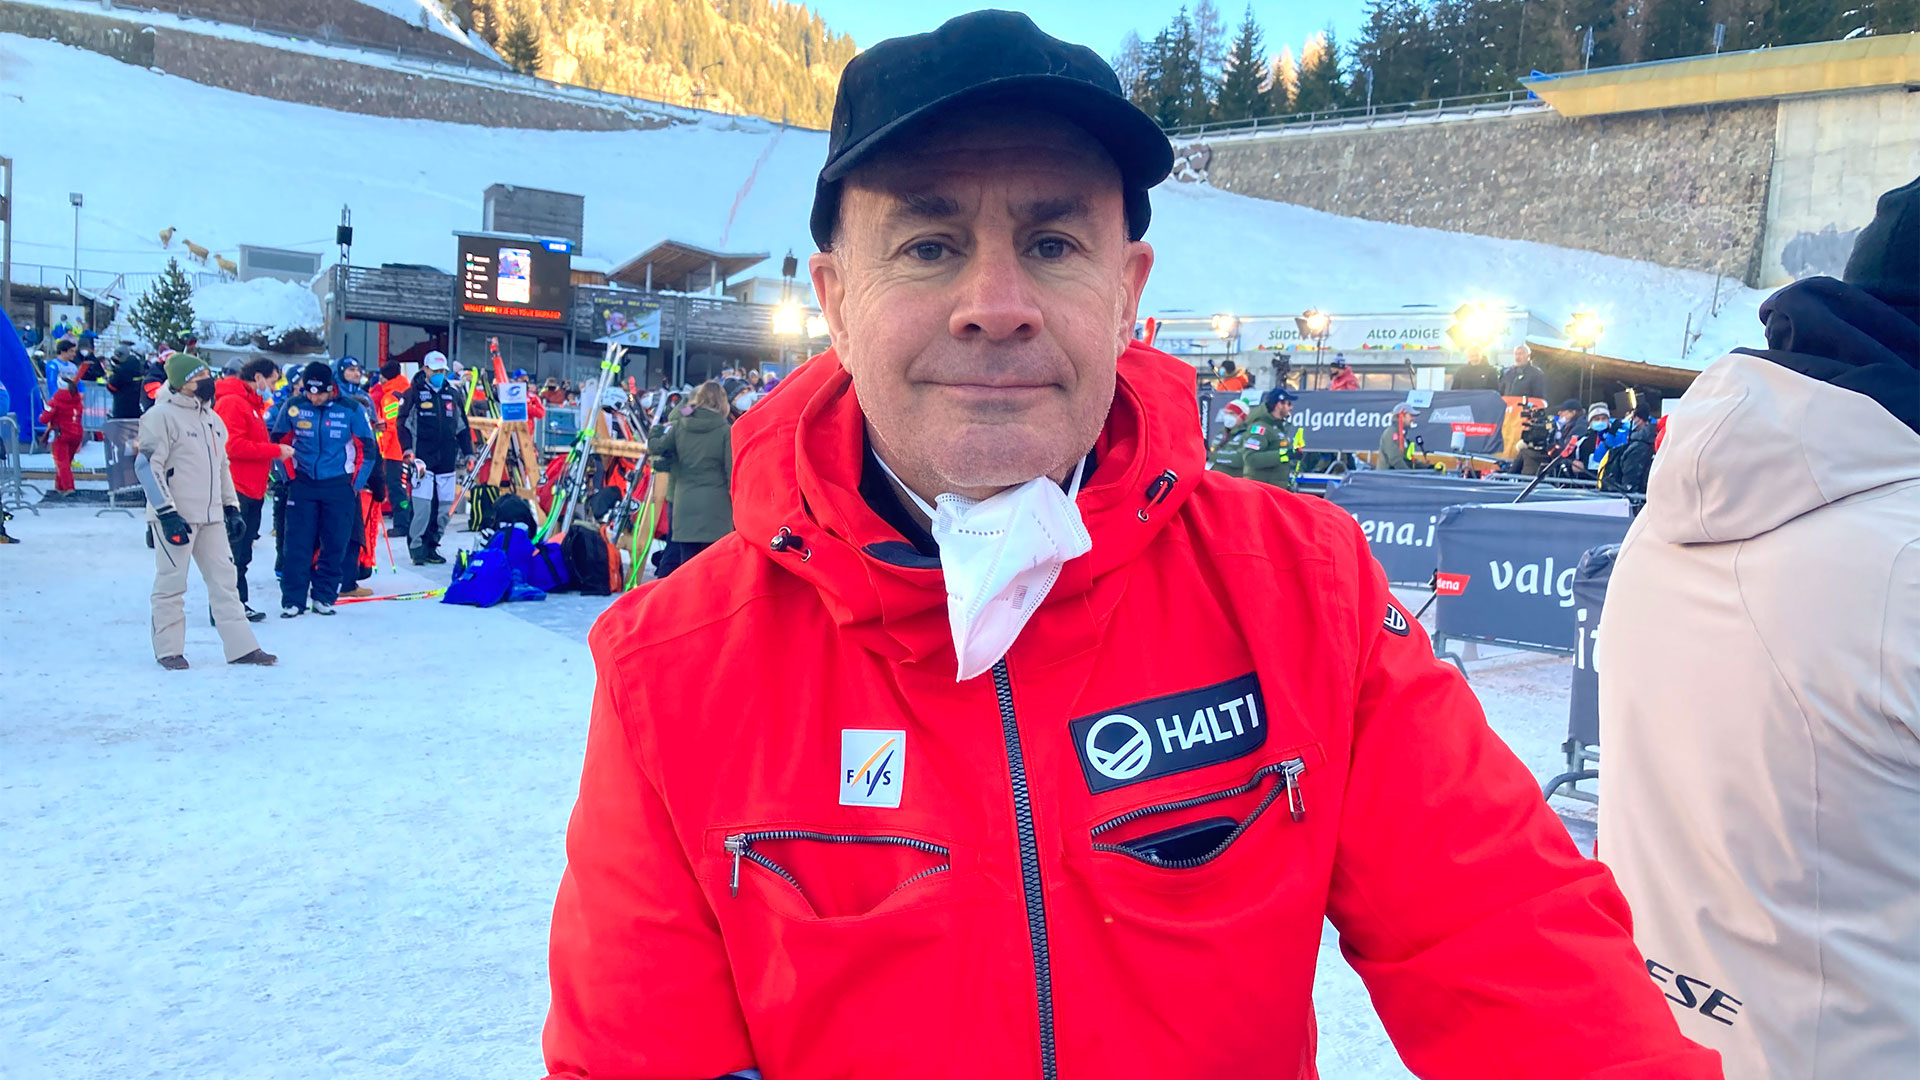 Eliasch at World Cup races in Val Gardena, Italy in December (Pinelli)